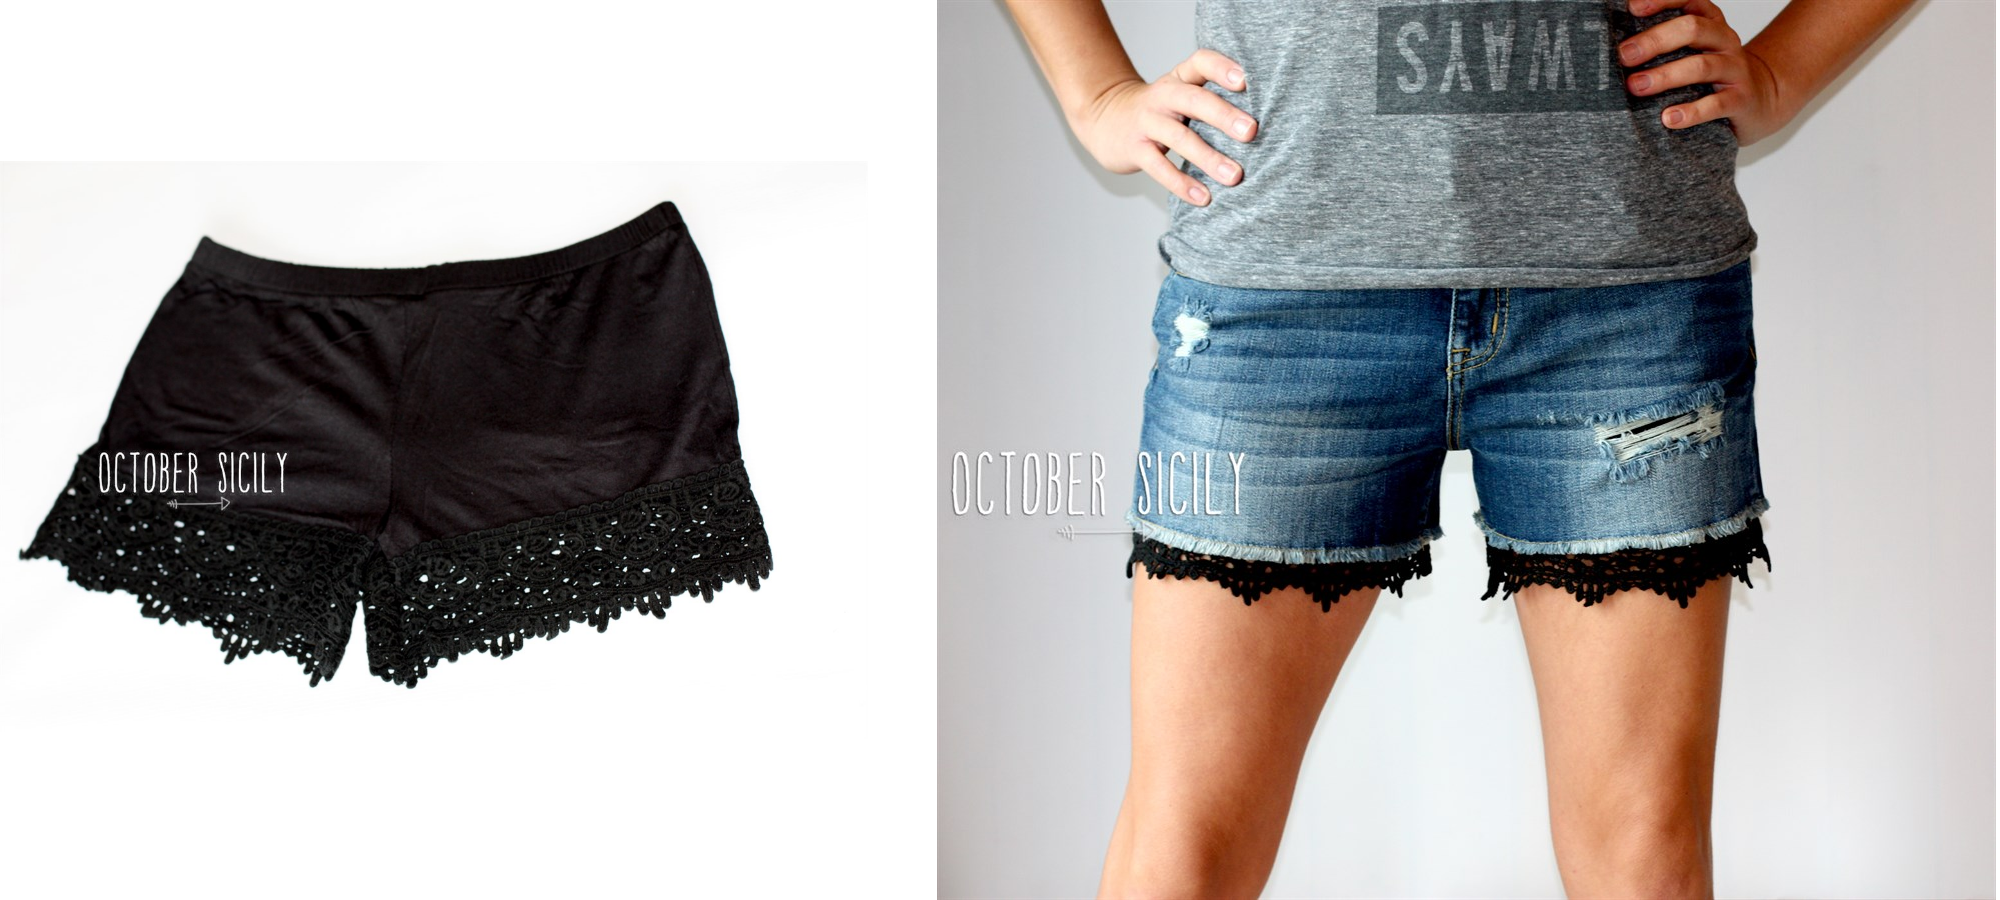 Lace Detail Short Extender Only $12.99!